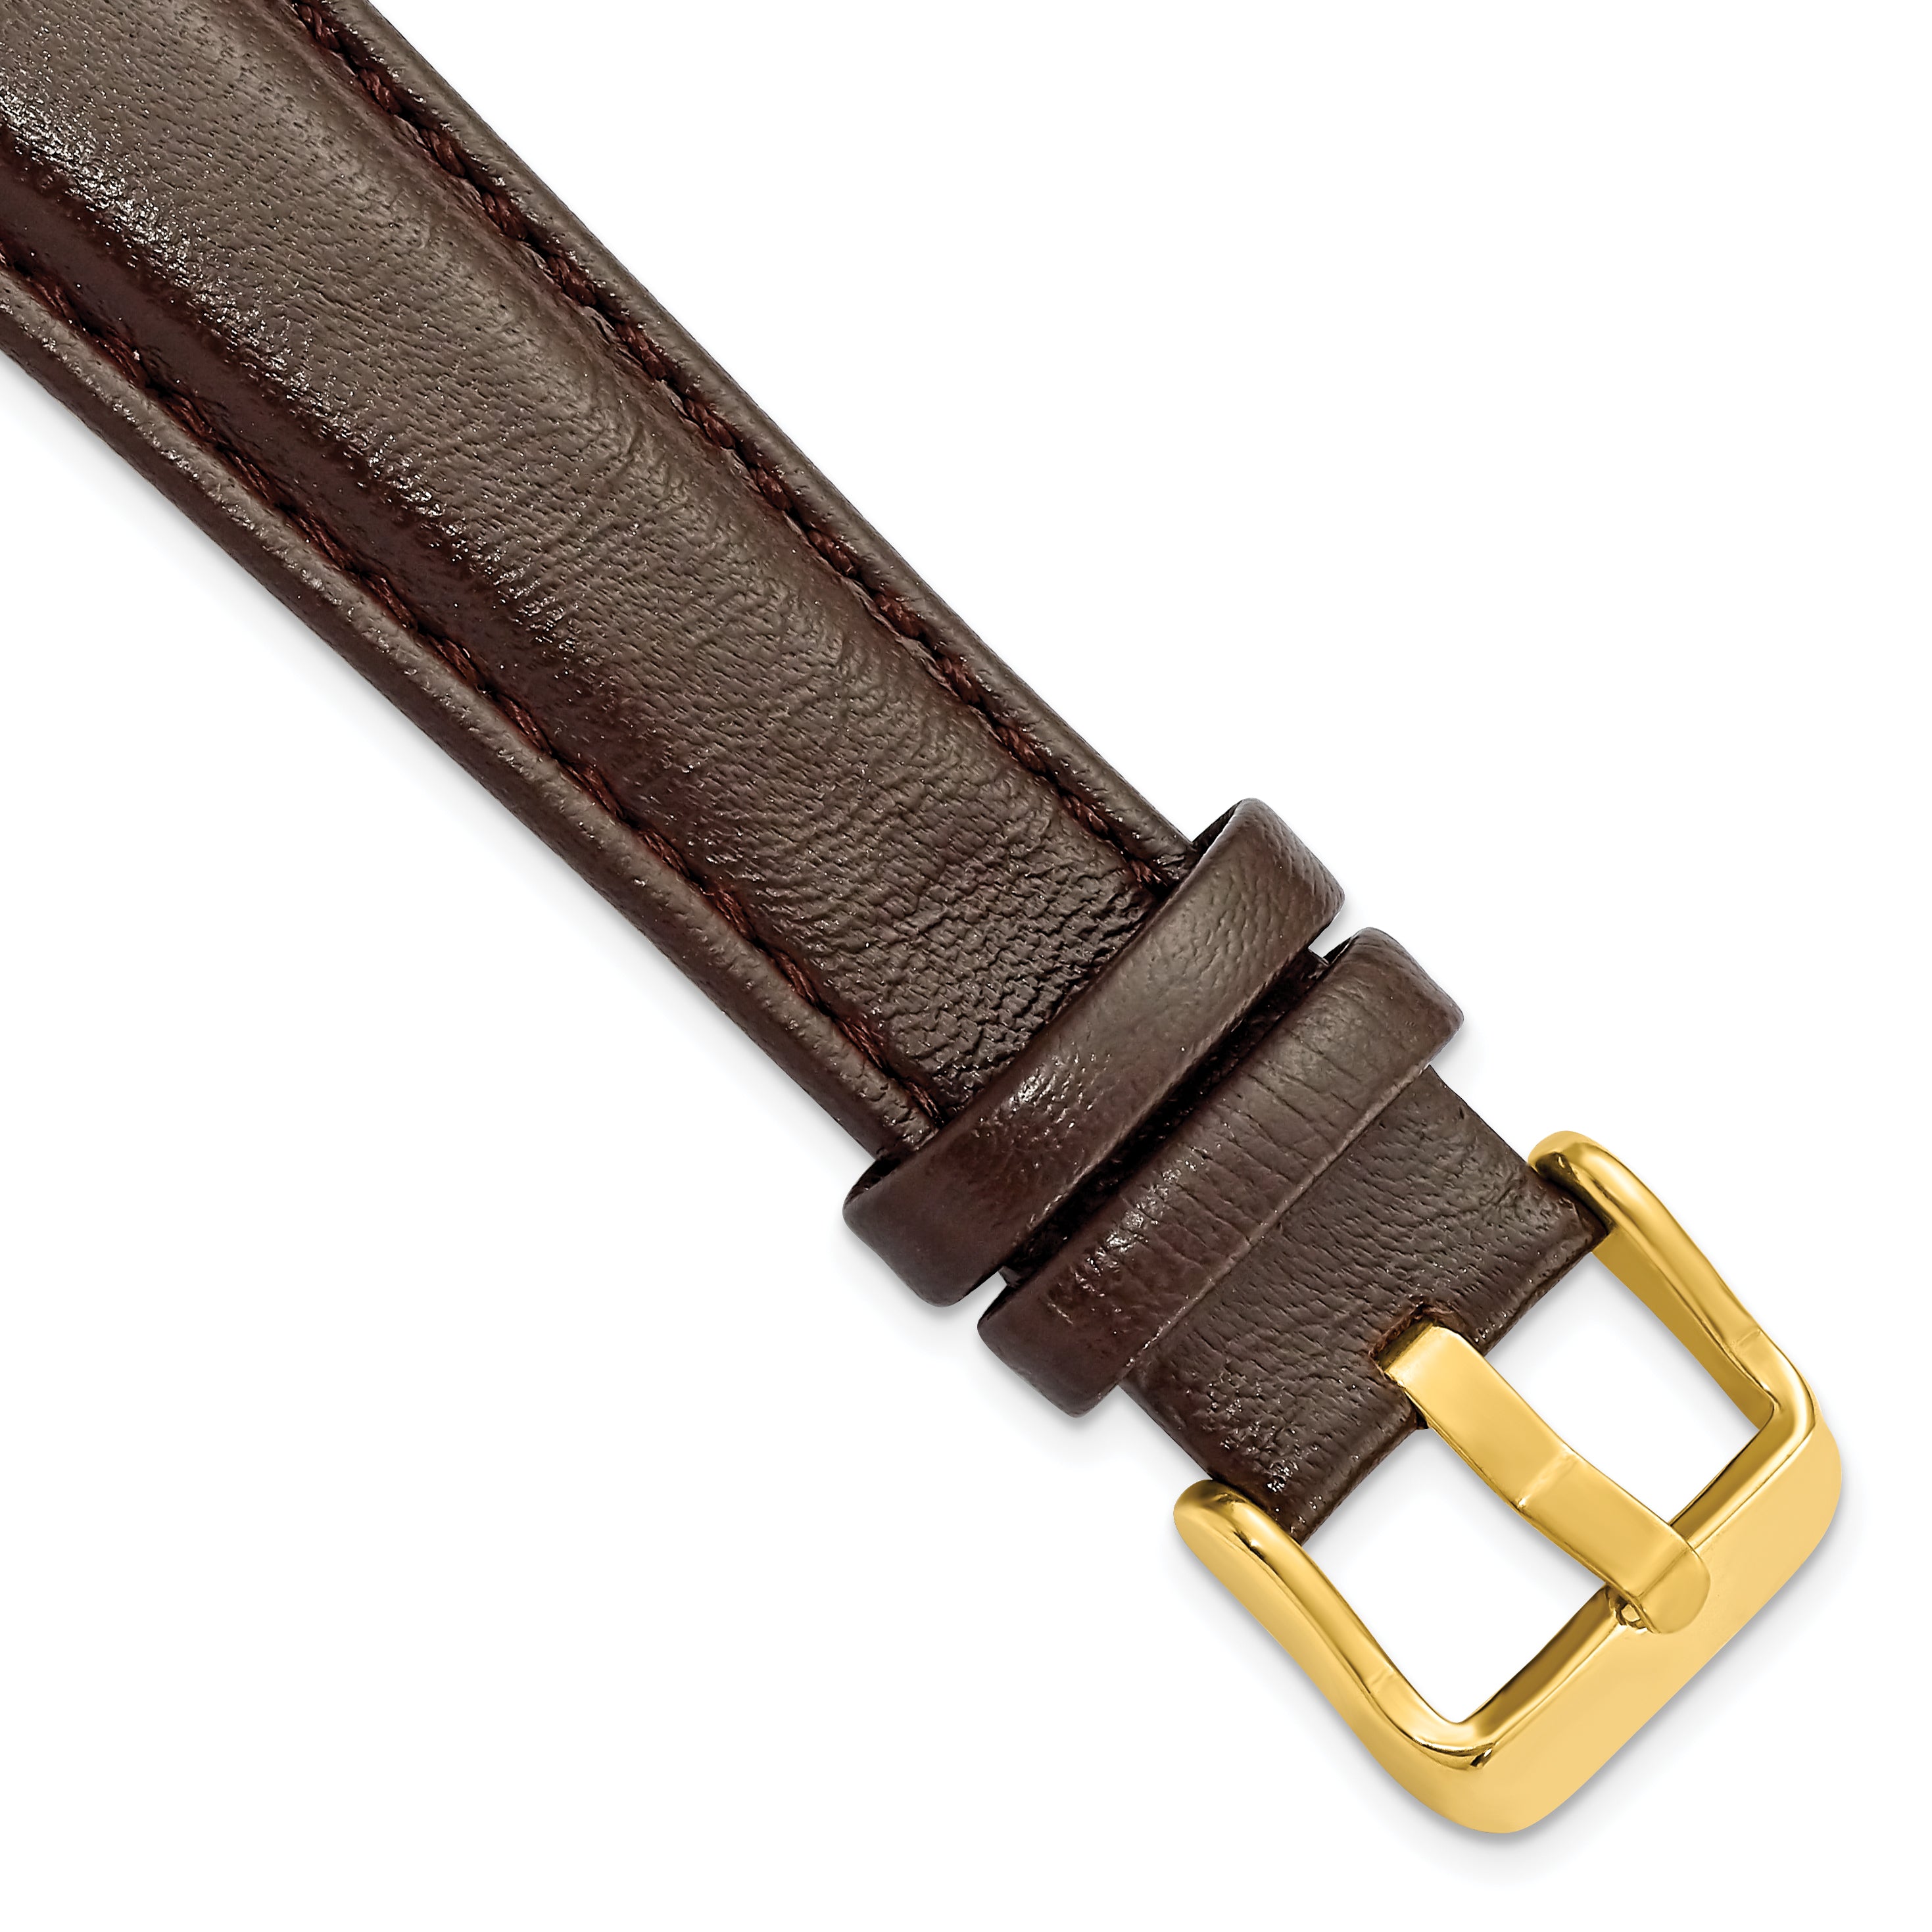 DeBeer 19mm Dark Brown Glove Leather with Gold-tone Panerai Style Buckle 7.75 inch Watch Band